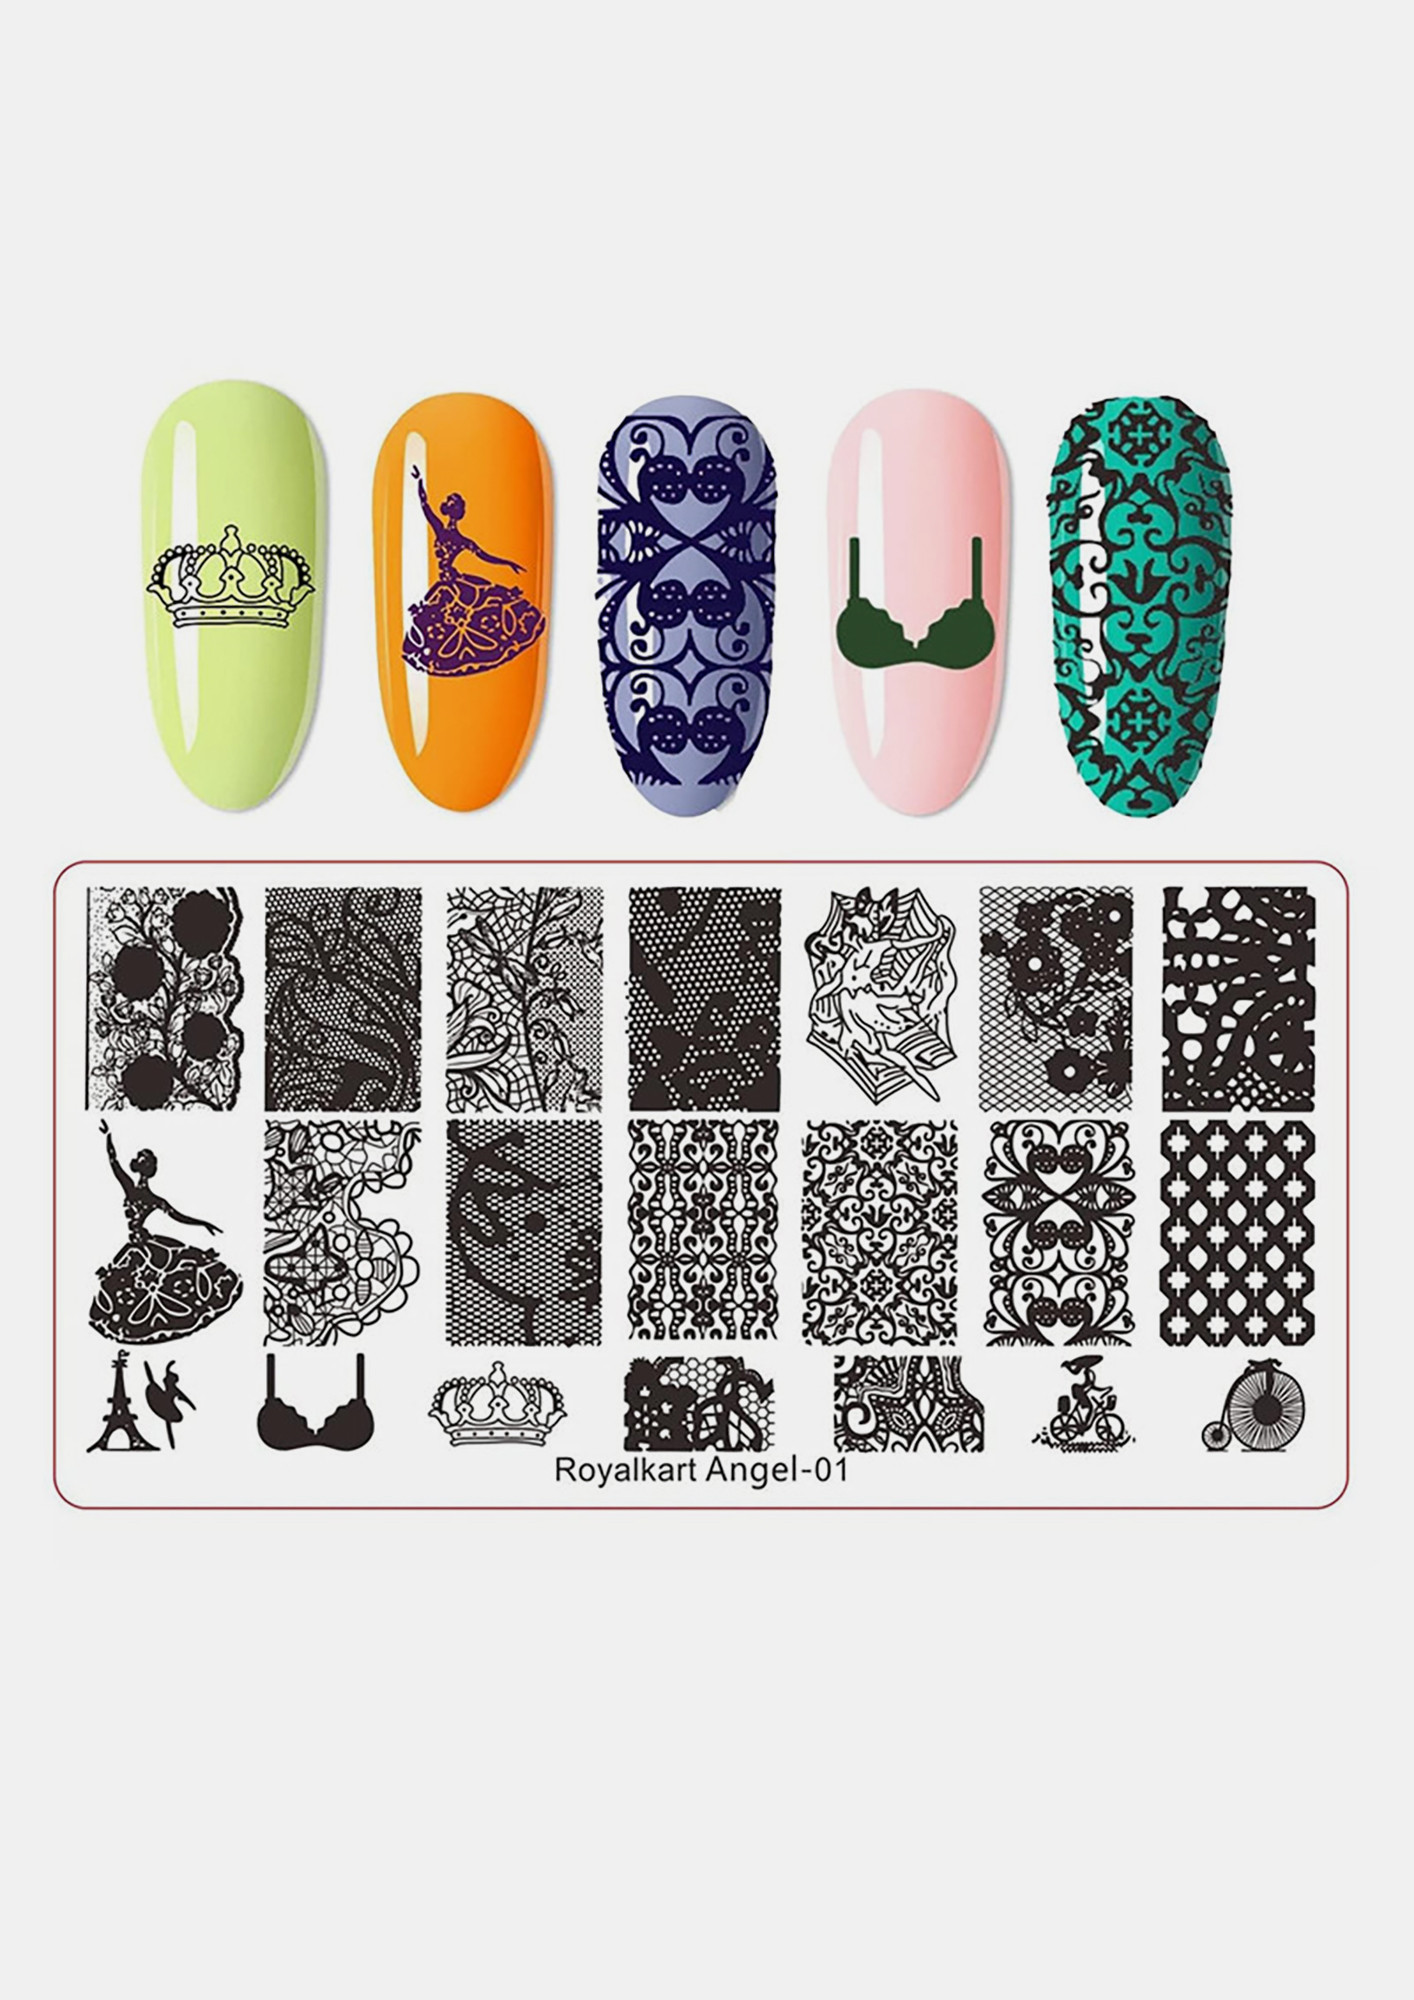 Buy Imported Silicone Soft Nail Stamper Scraper Polish Image Paint Stamp  Nail Art...-54001693MG Online at Low Prices in India - Amazon.in